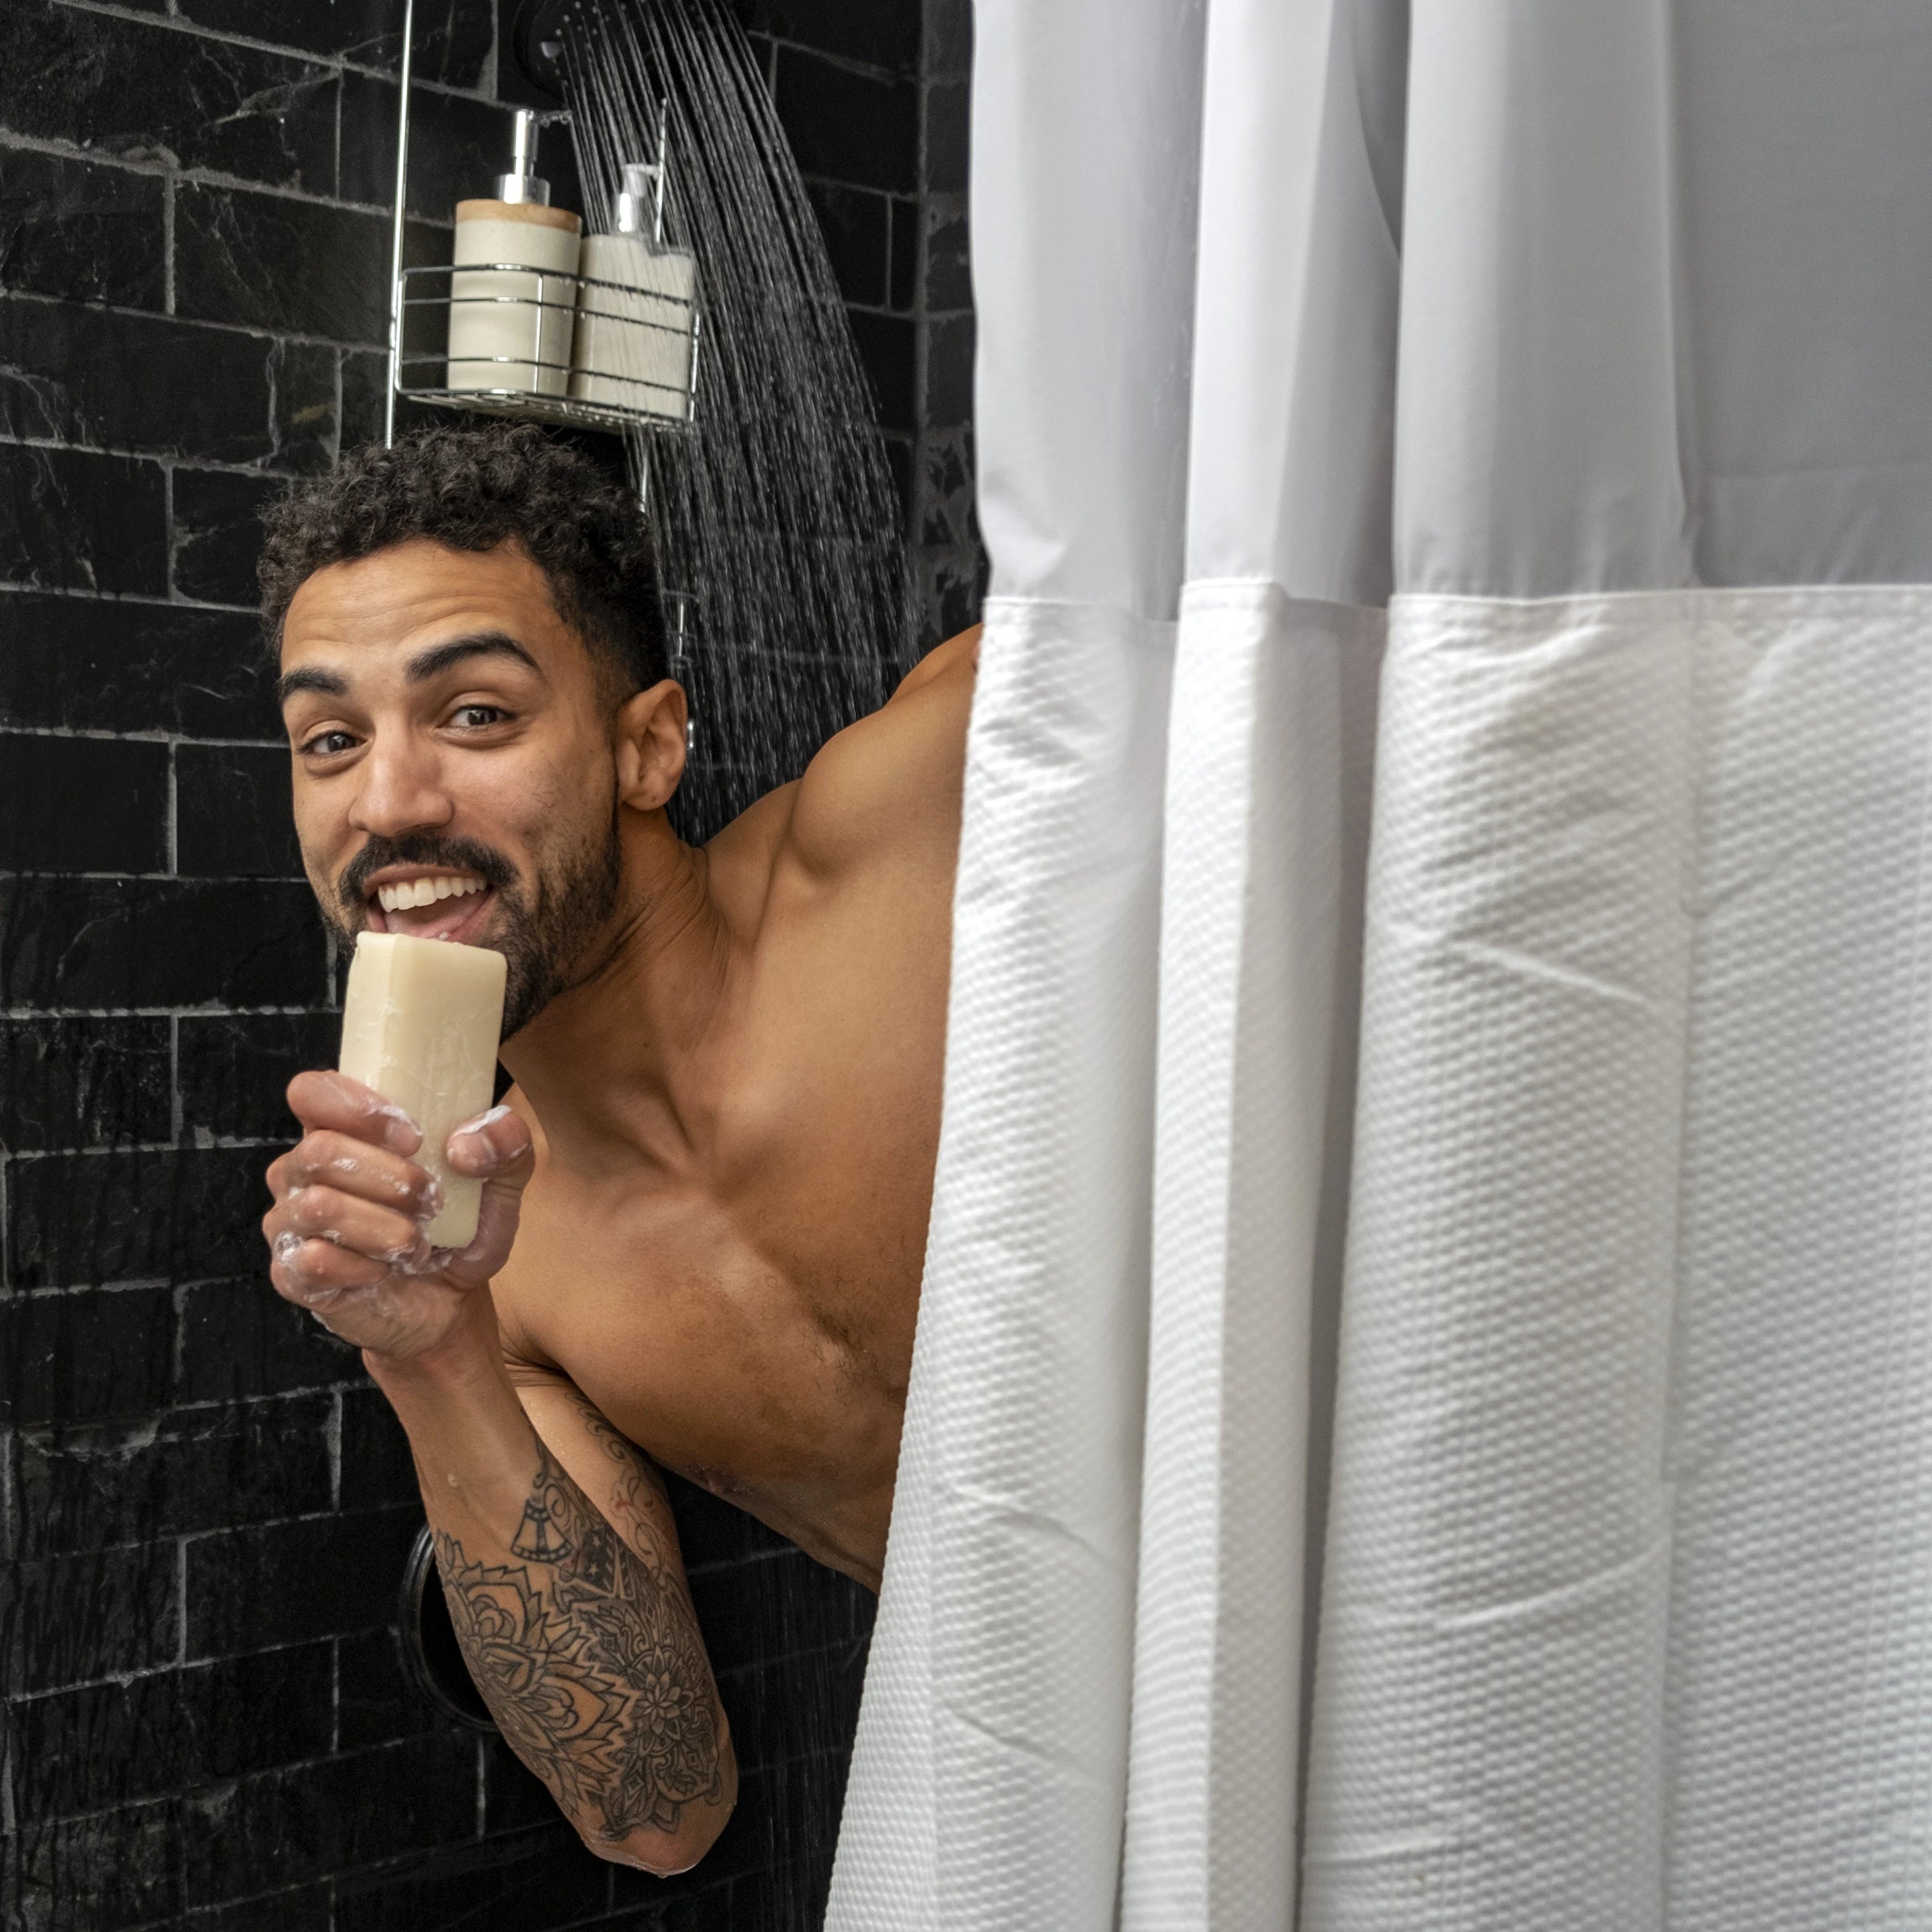 Male model peeking around a shower curtain and singing with a Man Bar soap